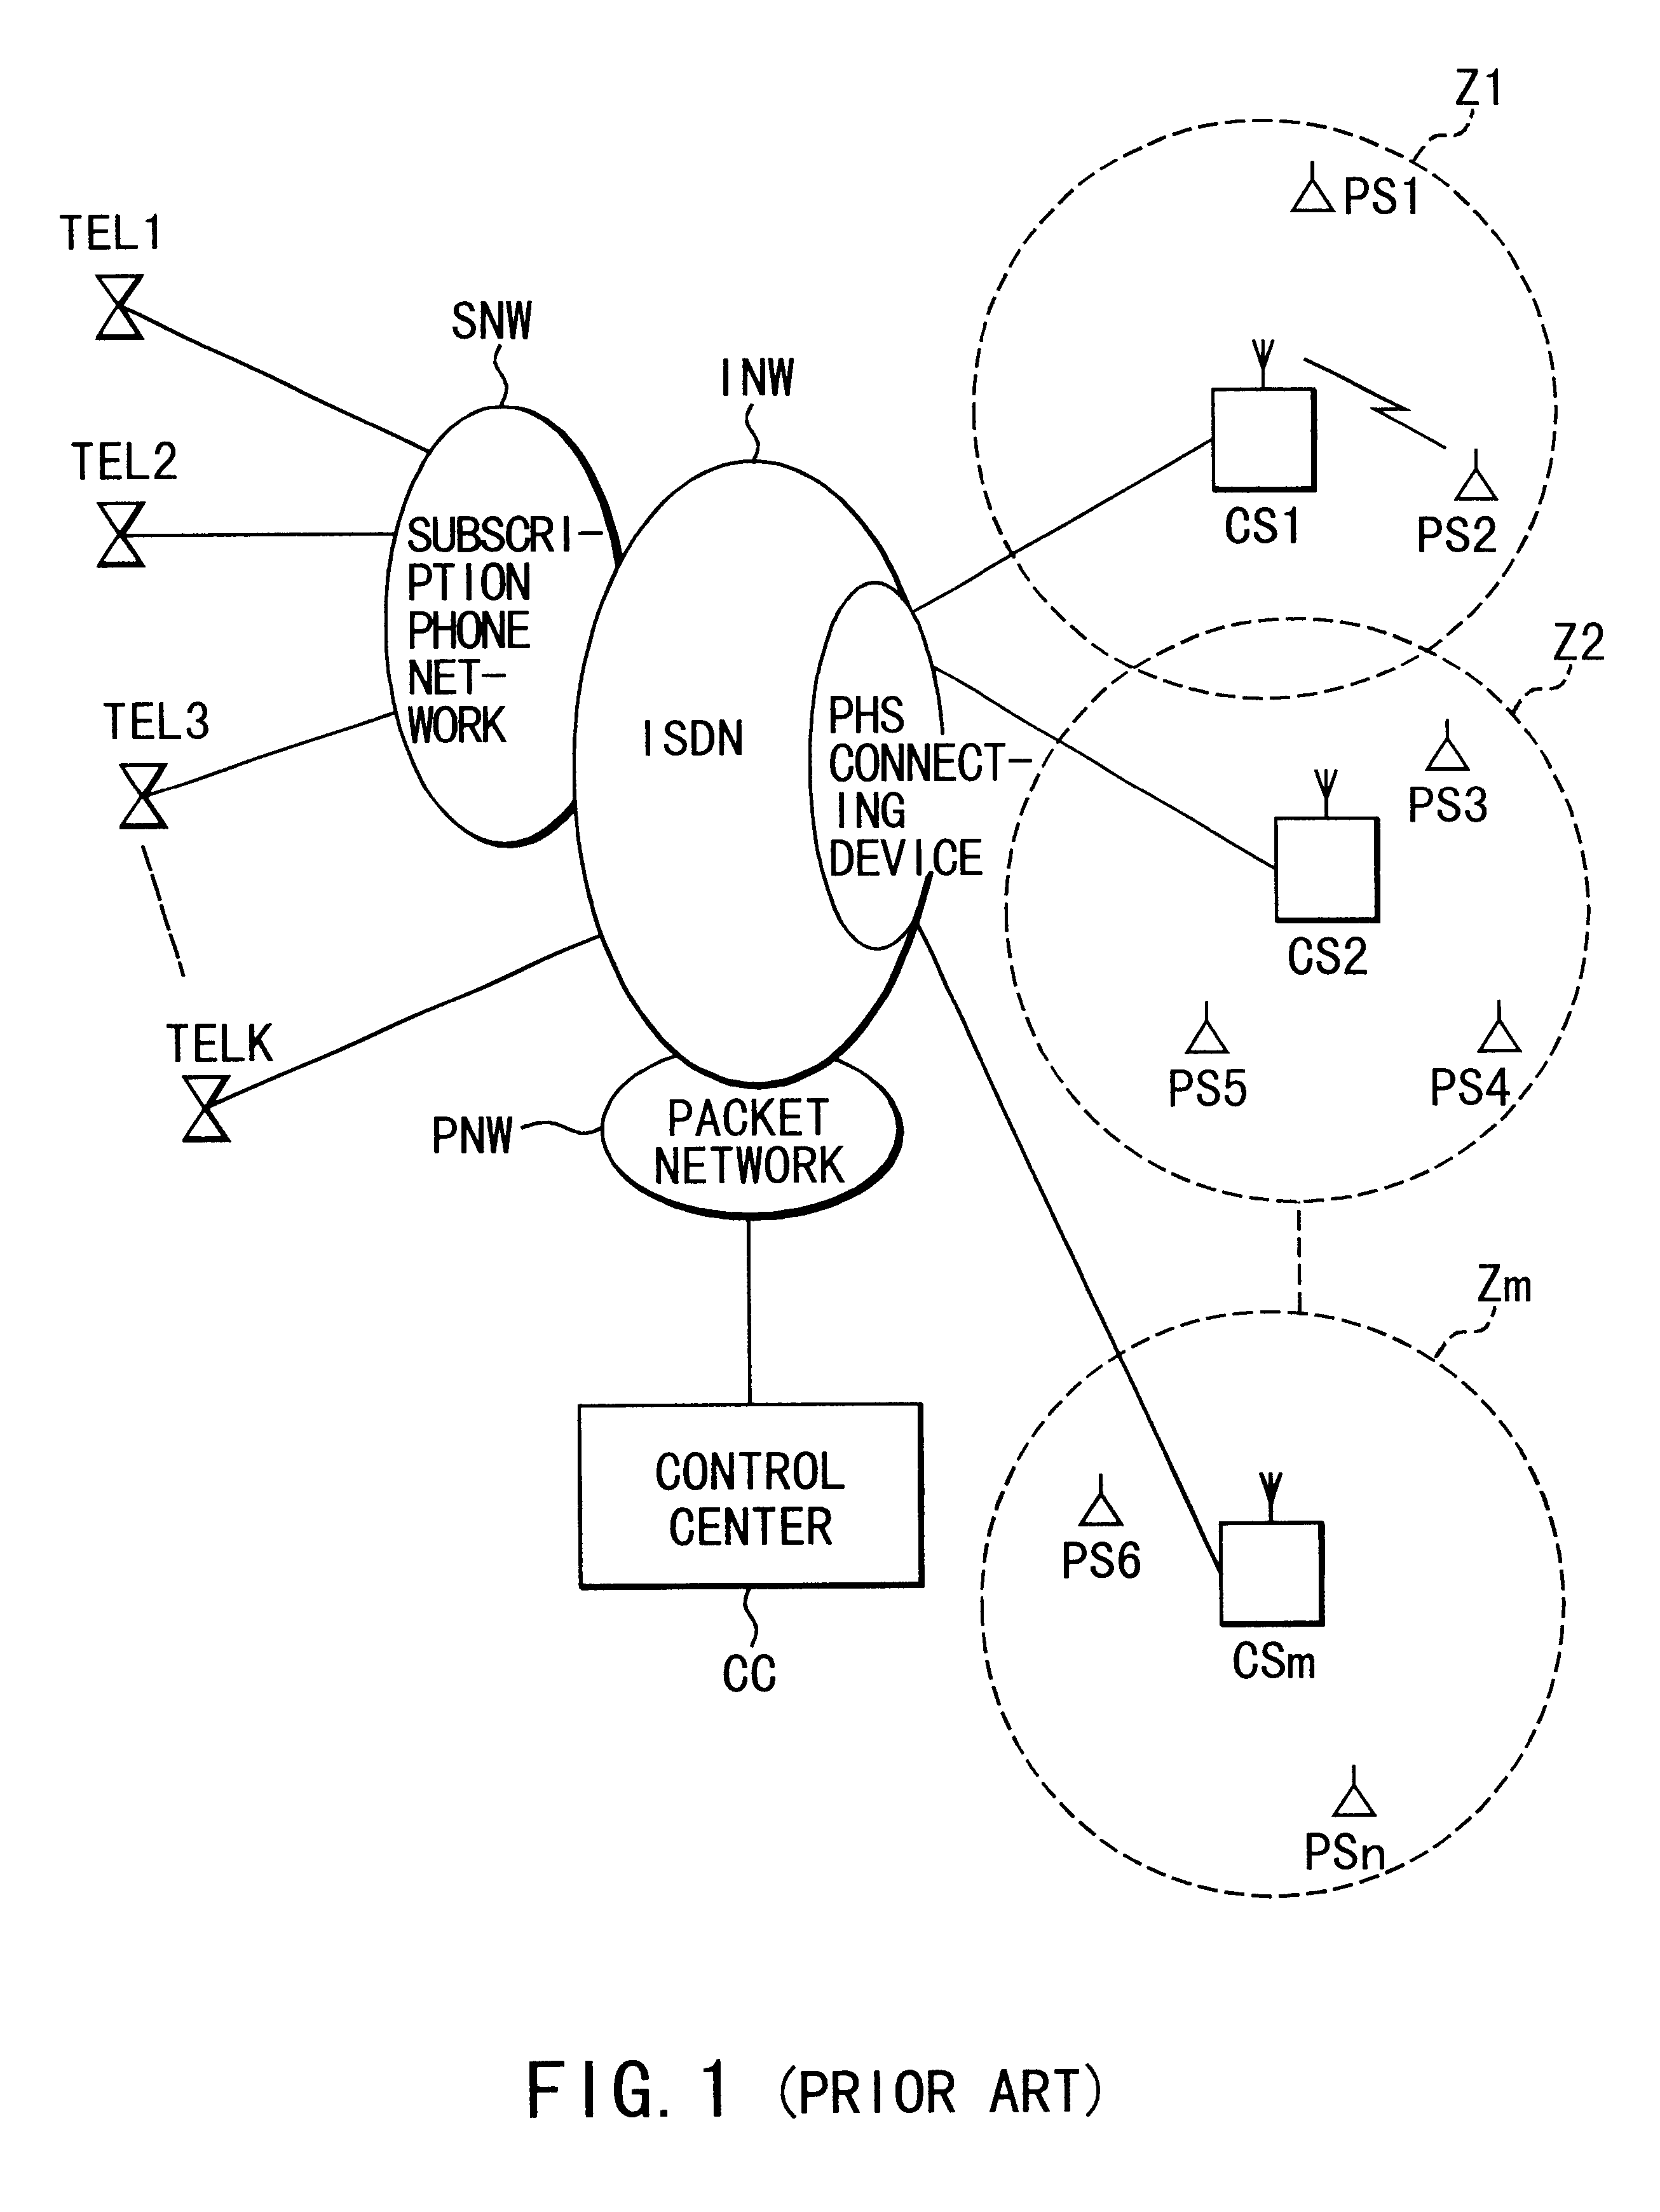 Frame synchronization system between base stations of mobile radio communication system and base station device employing this system